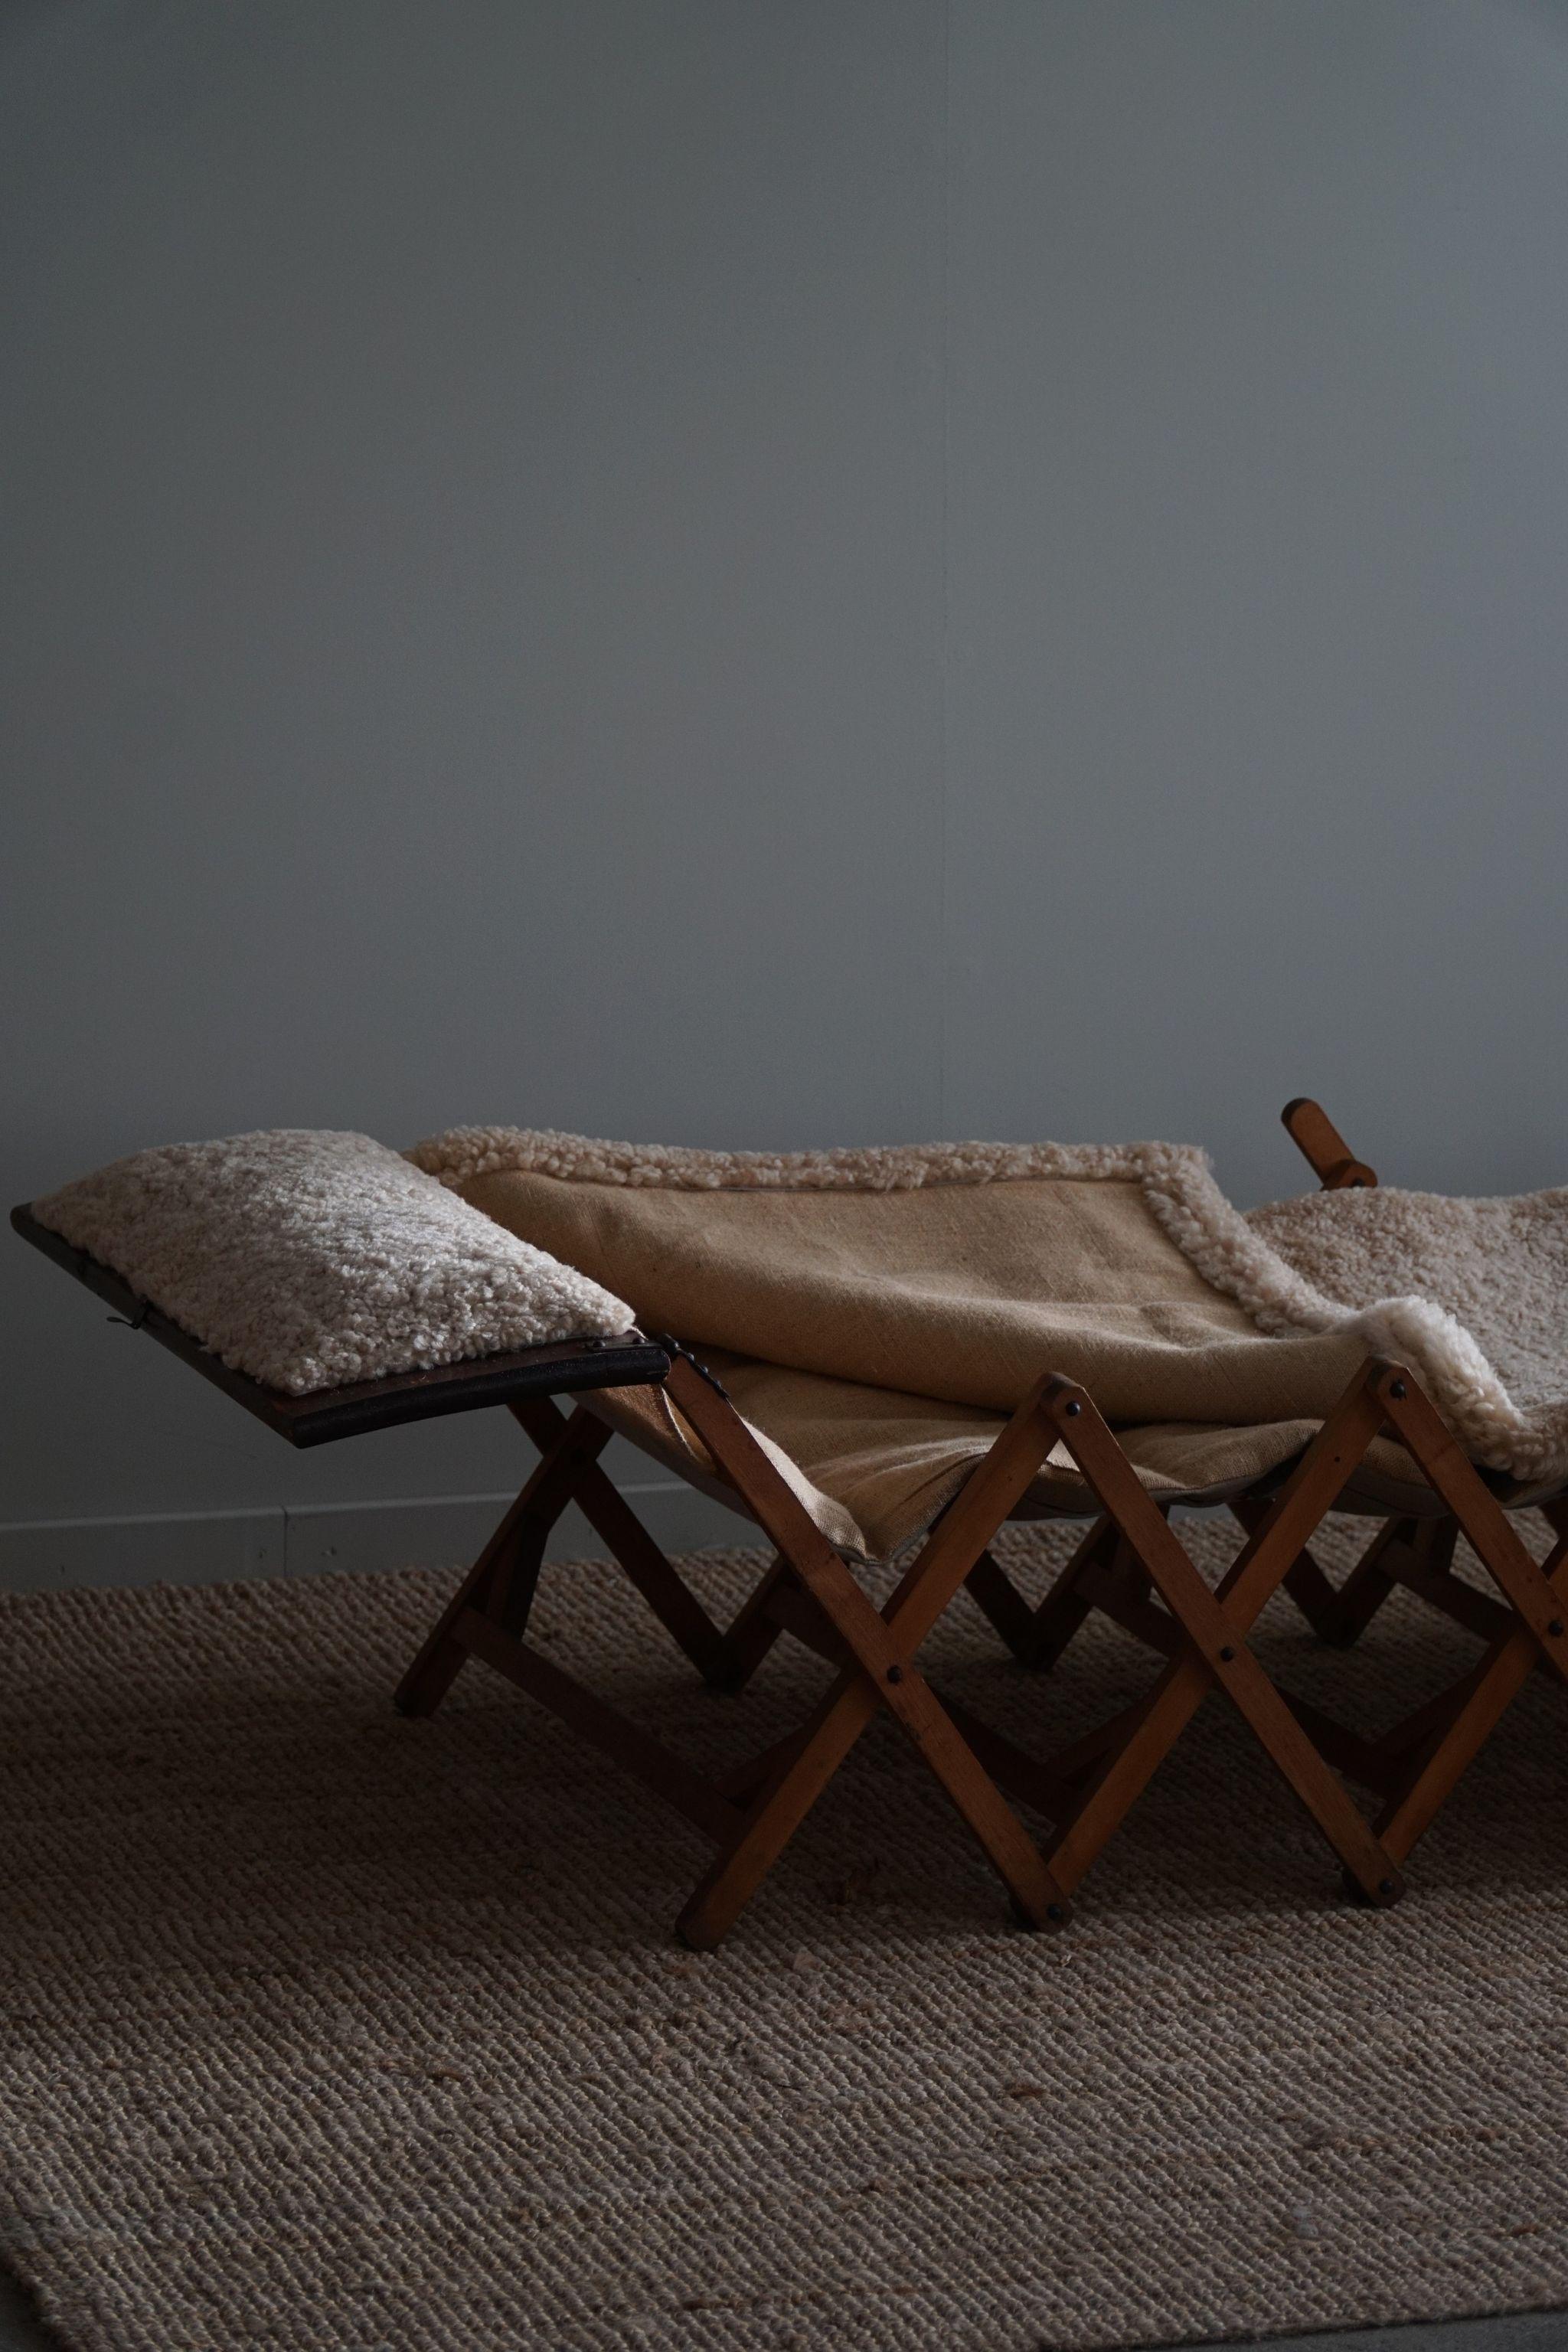 Folding Daybed in Hessian & Lambswool, Made by a Danish Cabinetmaker, 1930s For Sale 5